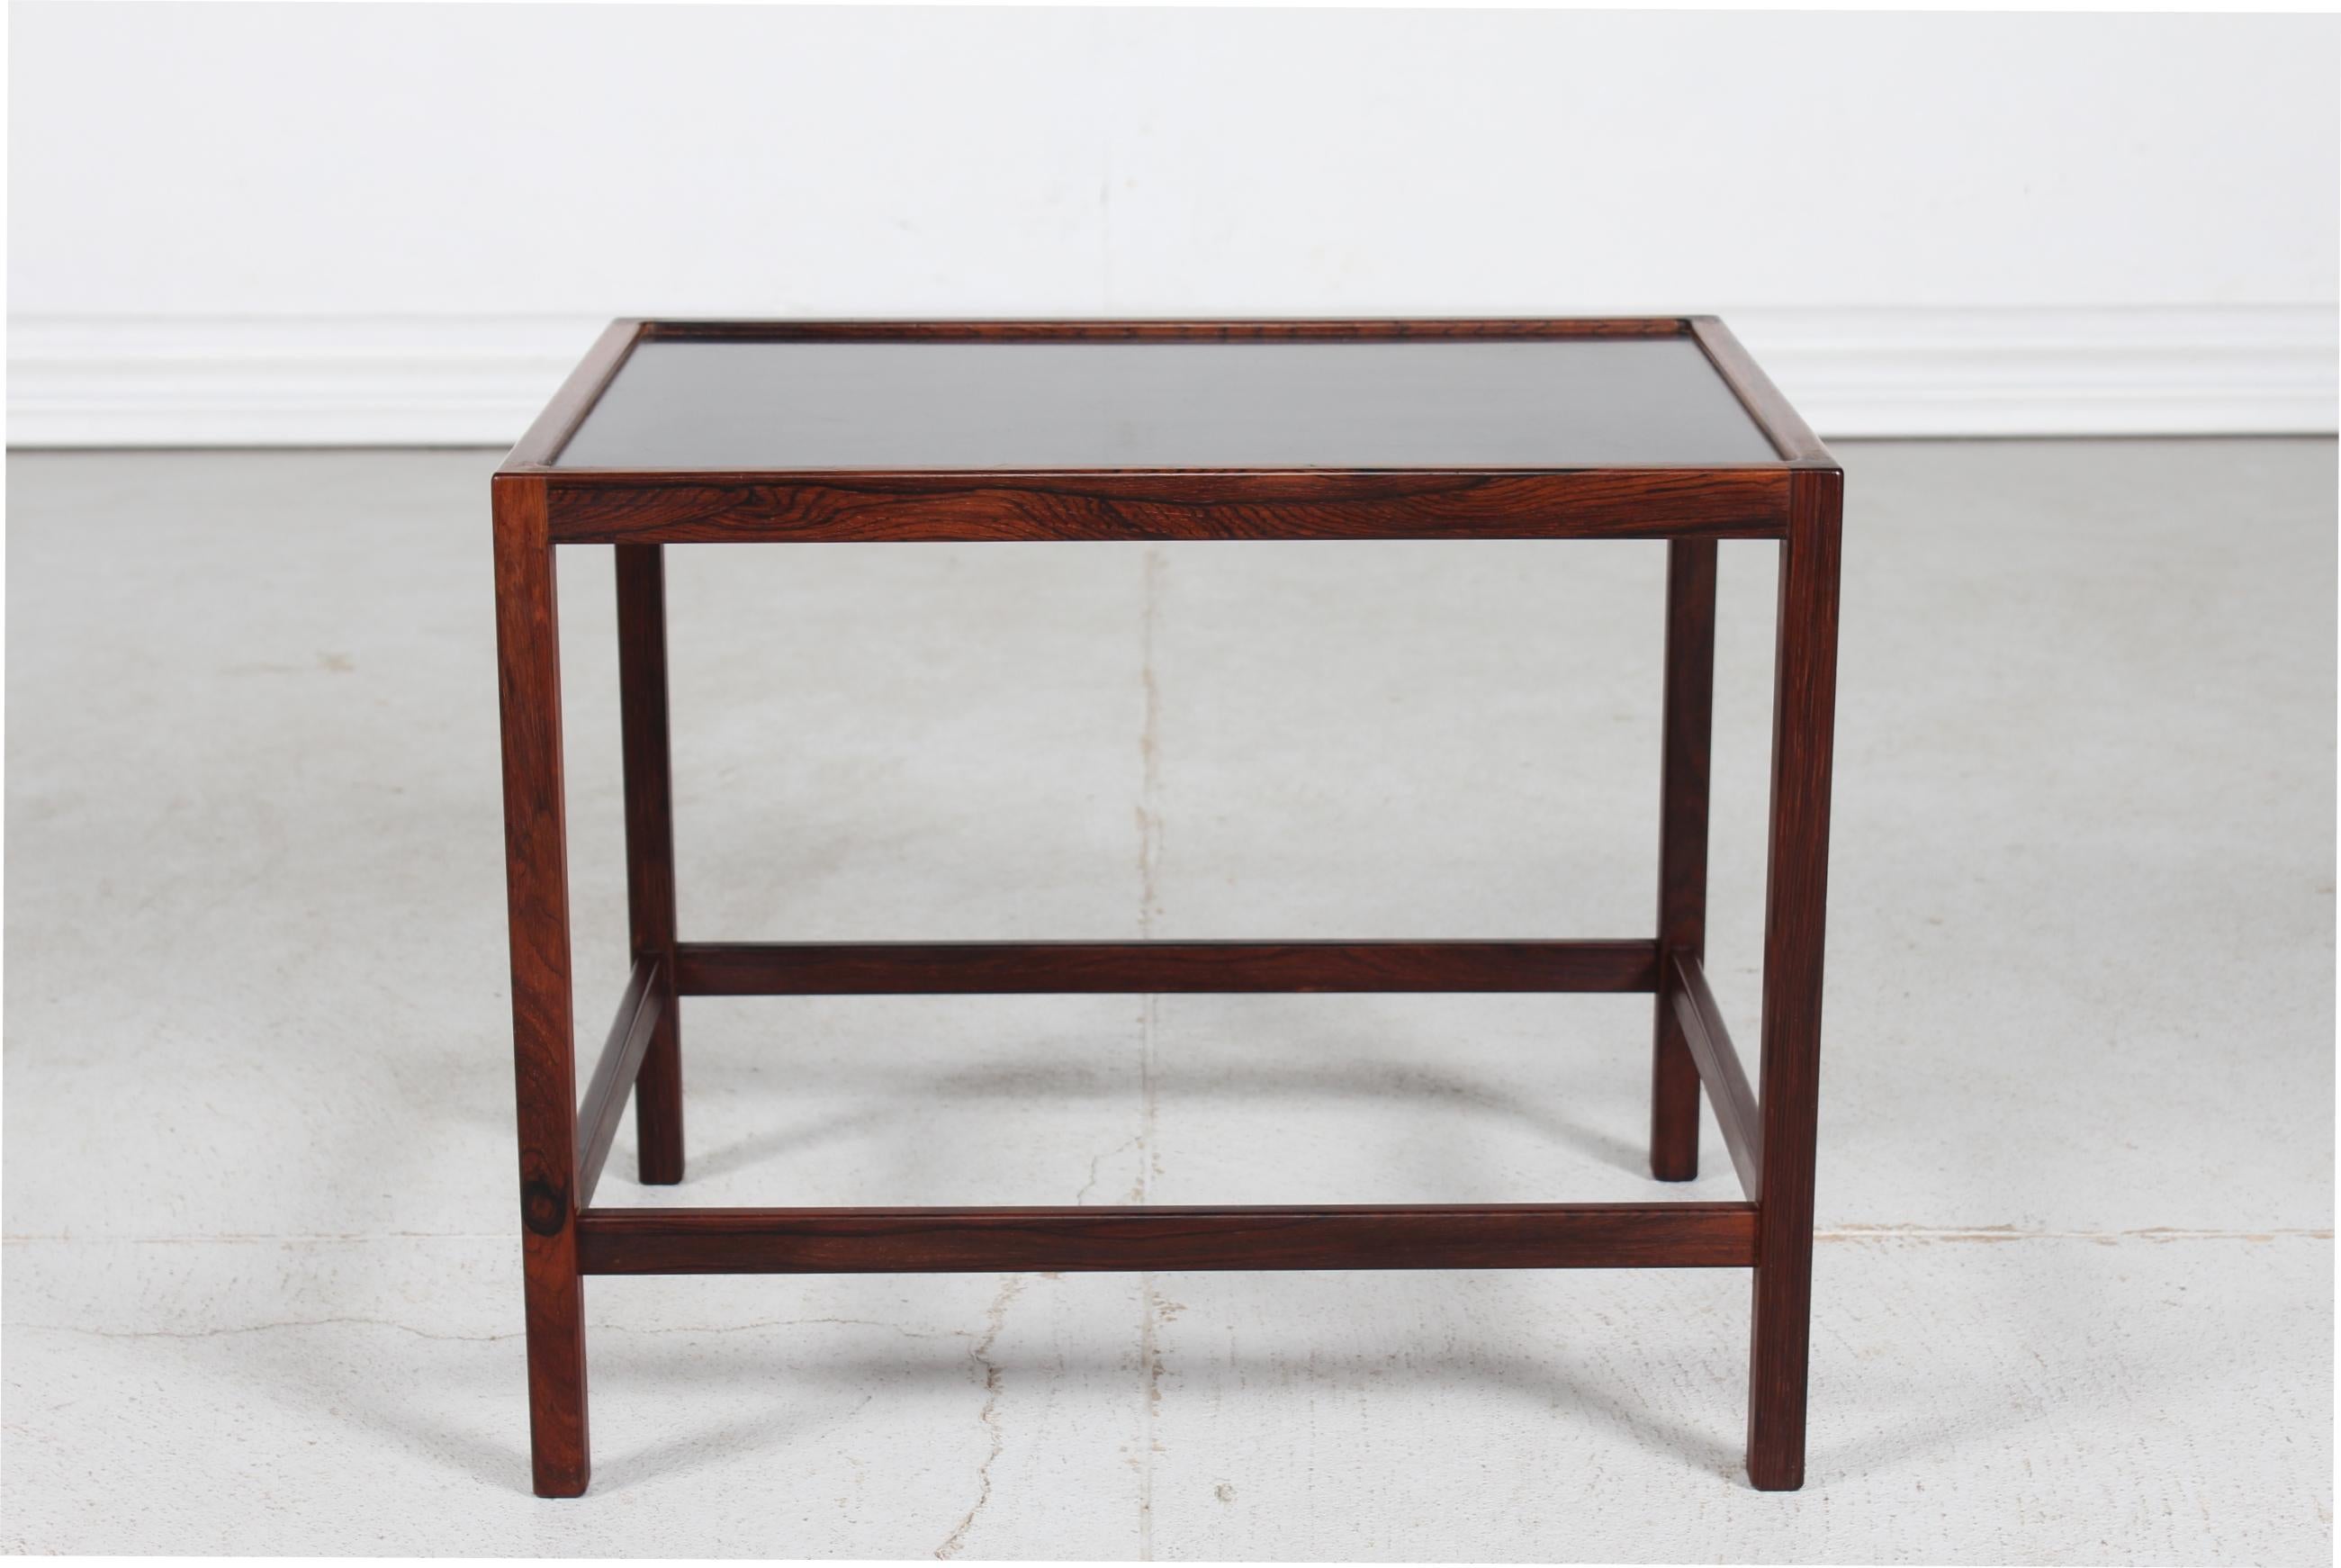 Side table by the Danish designer Kurt Østervig (1912-1986) manufactured by Jason Møbler in Danmark.

It's made of rosewood with a tabletop of inlaid black formica

Very nice vintage condition without spots or other damage.